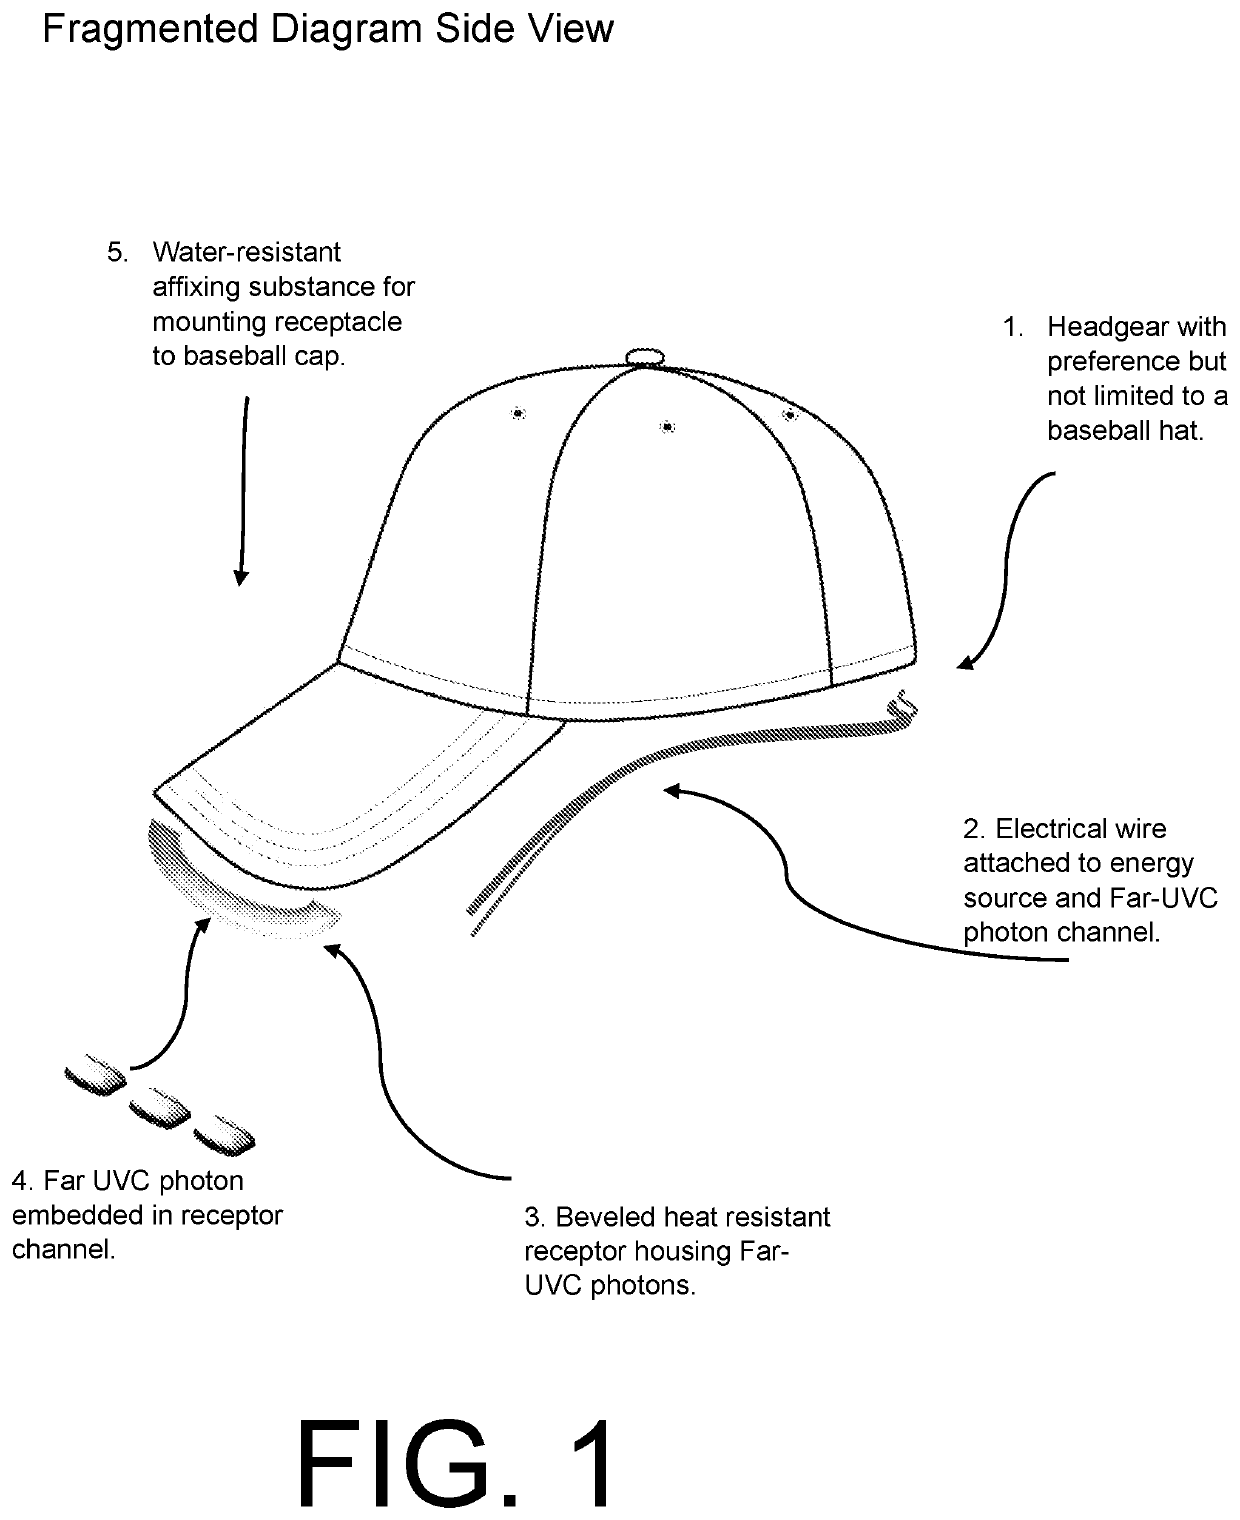 Wearable far-UVC with integration in wearable personal protective equipment (PPE), headgear, baseball caps, helmets, necklaces, anklets, bracelets, and other apparel to inactivate and protect from viruses and micro-organisms